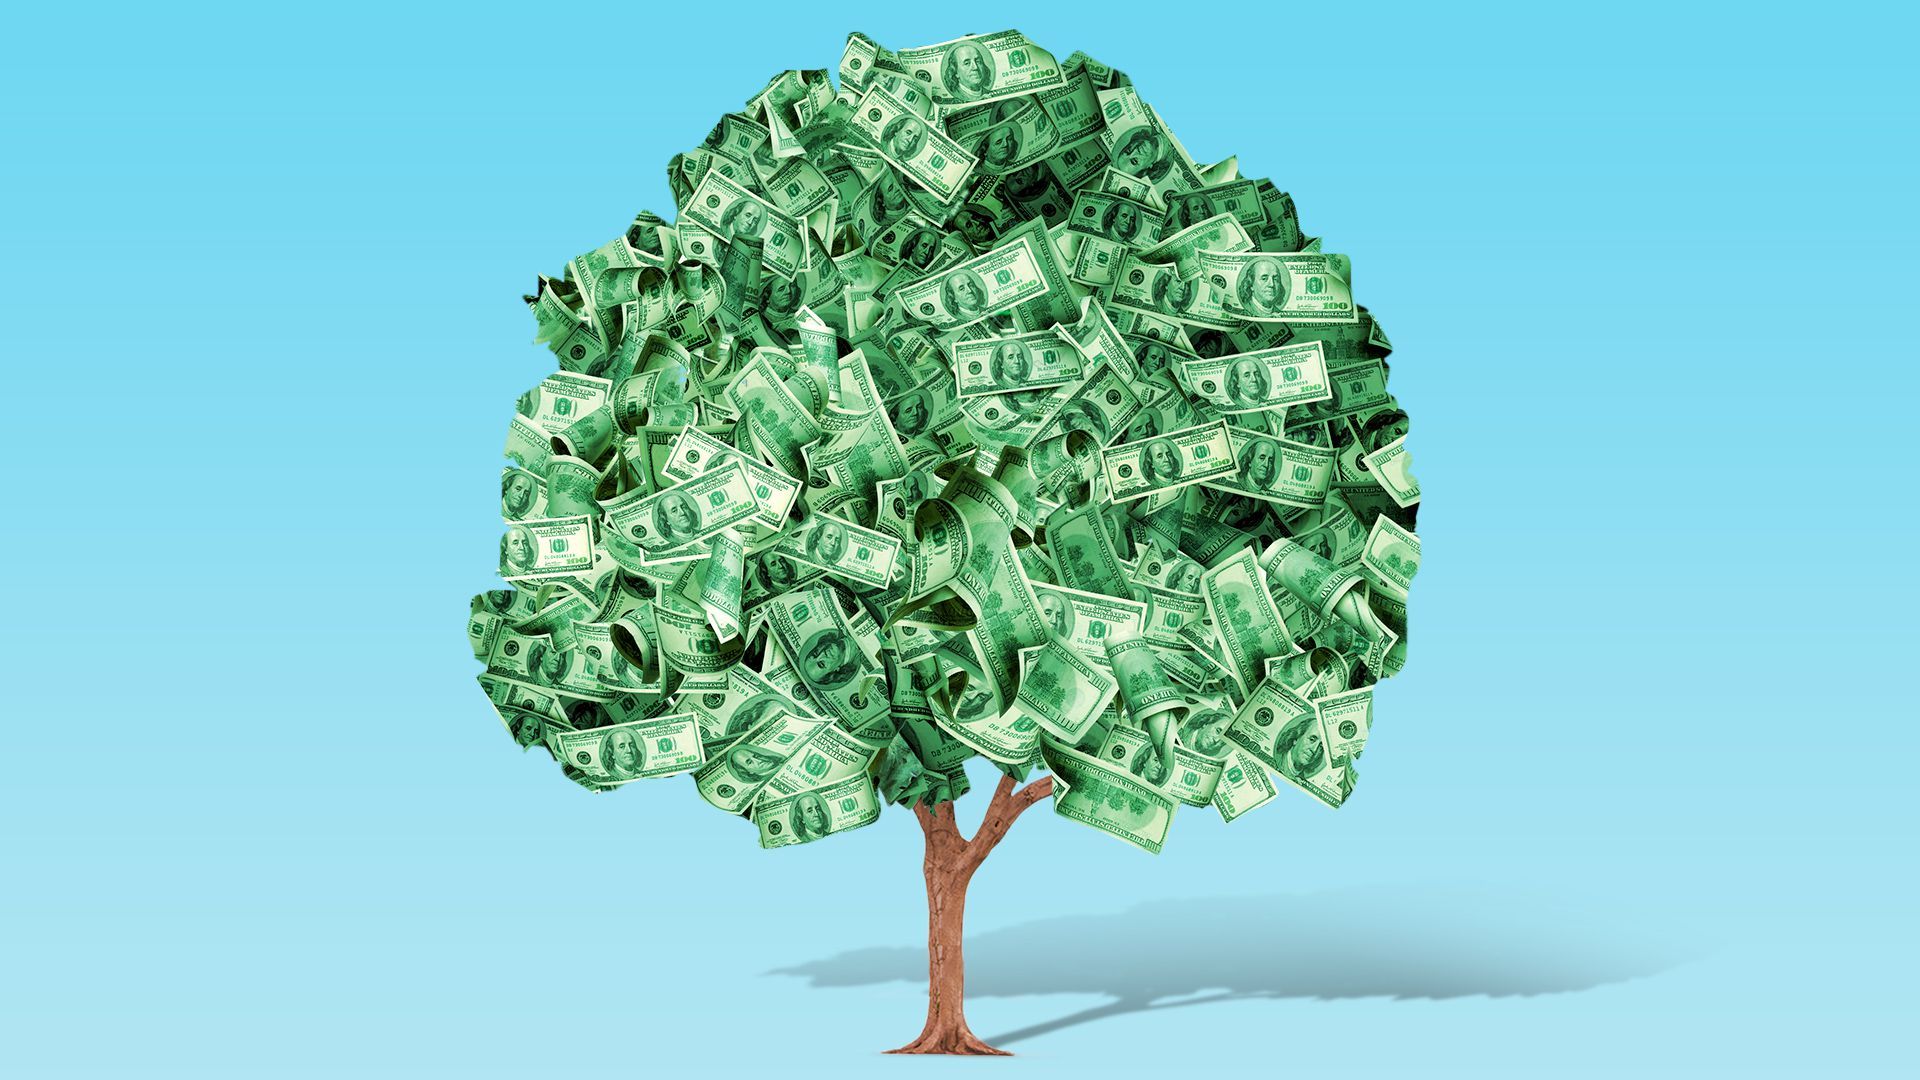 Illustration of a tree with money as the leaves.